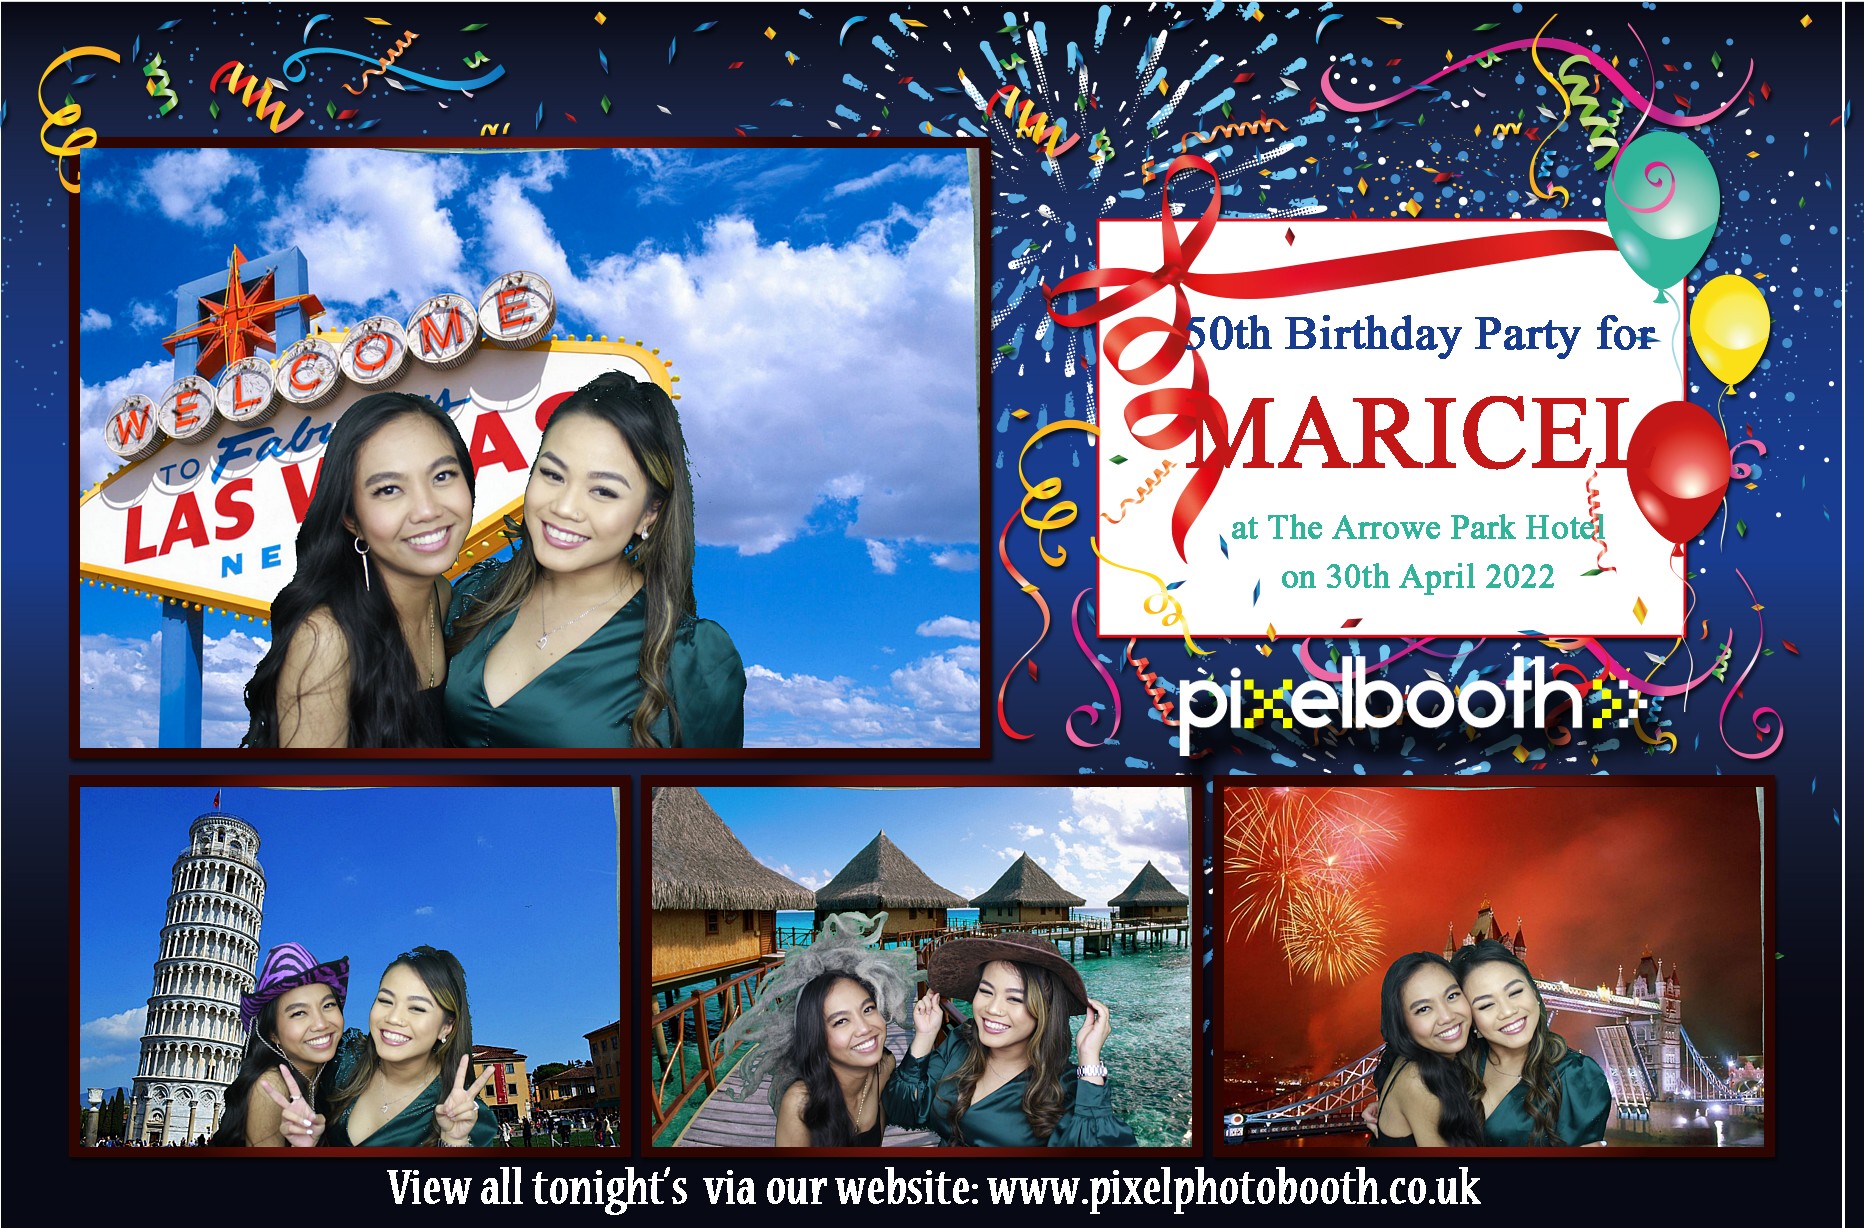 30th April 2022: 50th Birthday for Maricel